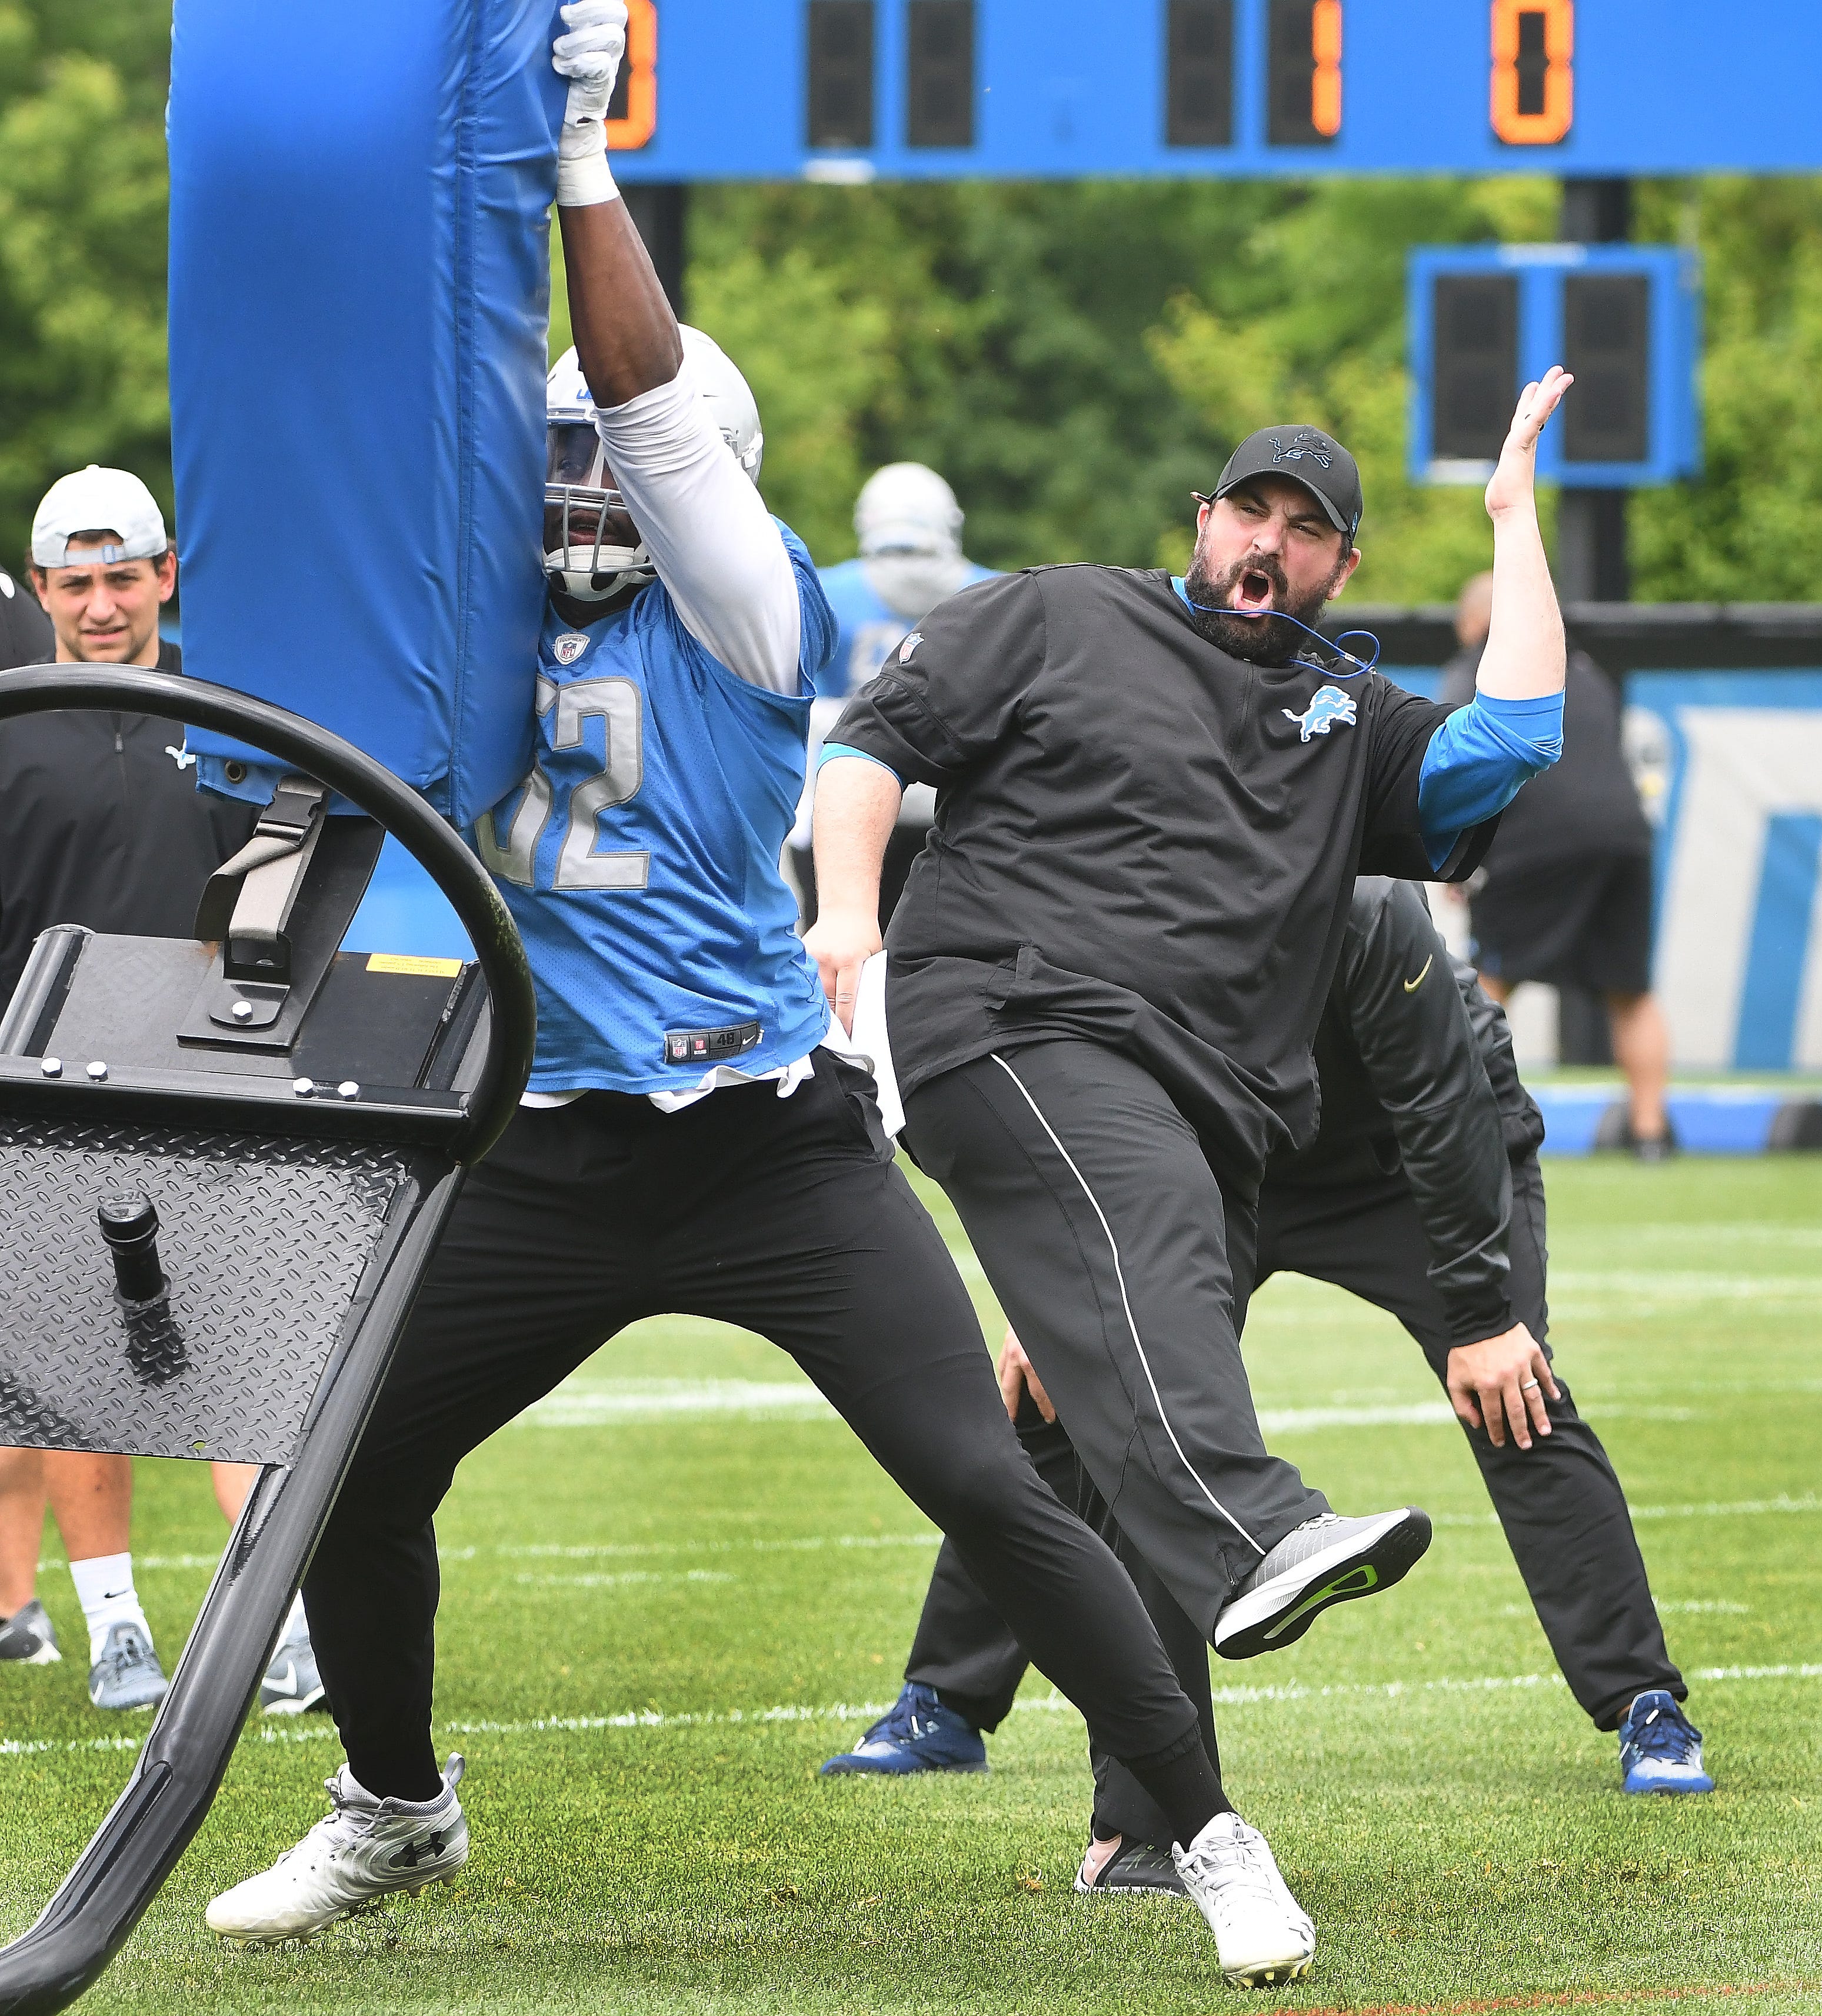 Lions head coach Matt Patricia works with linebacker Christina Jones hitting the sled during drills during minicamp in Allen Park, Michigan on June 5, 2019.